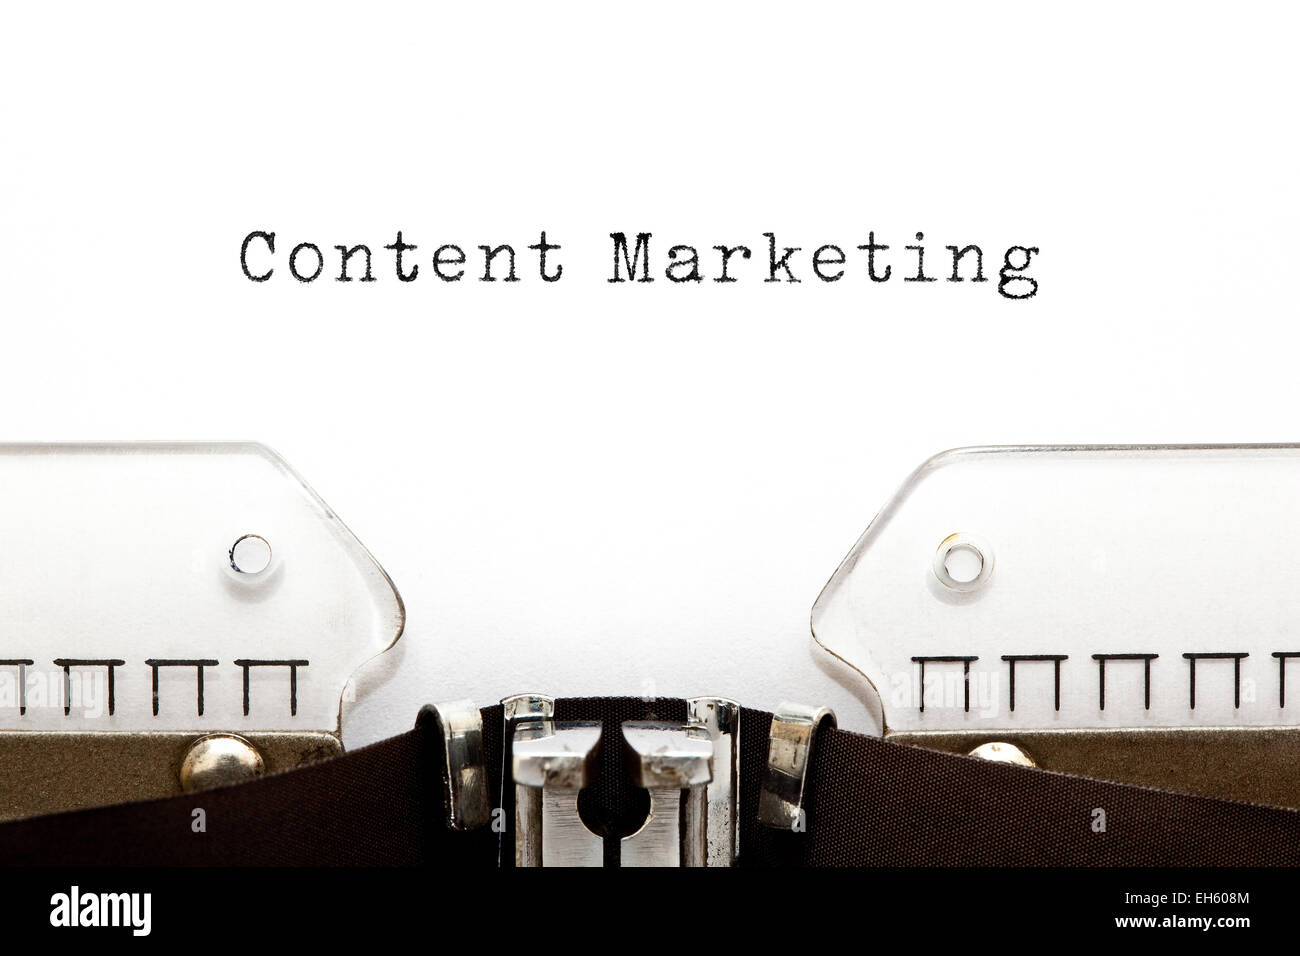 Content Marketing typed on white paper on old typewriter. Stock Photo